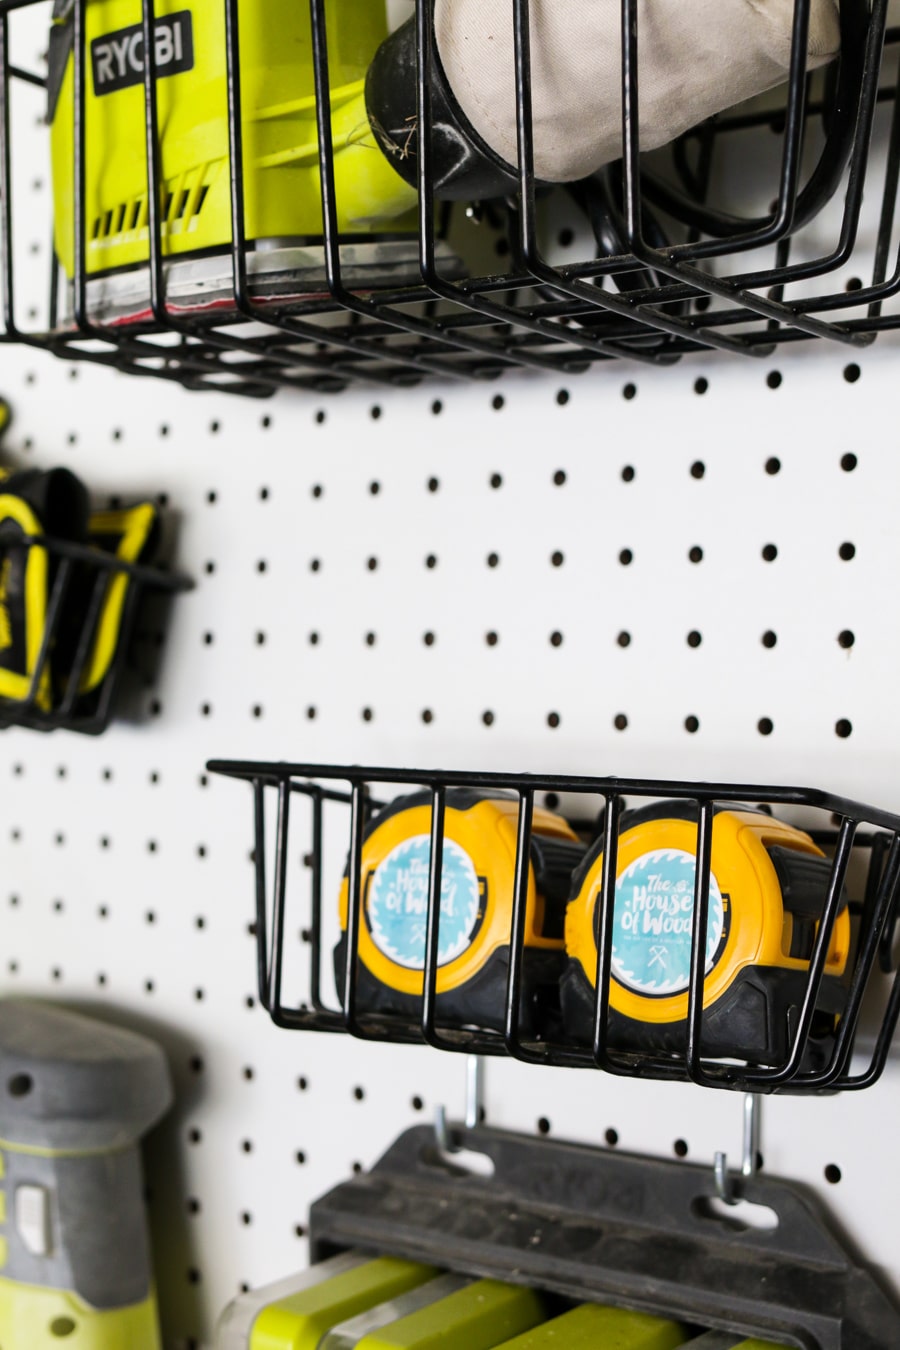 How to organize tools with pegboard